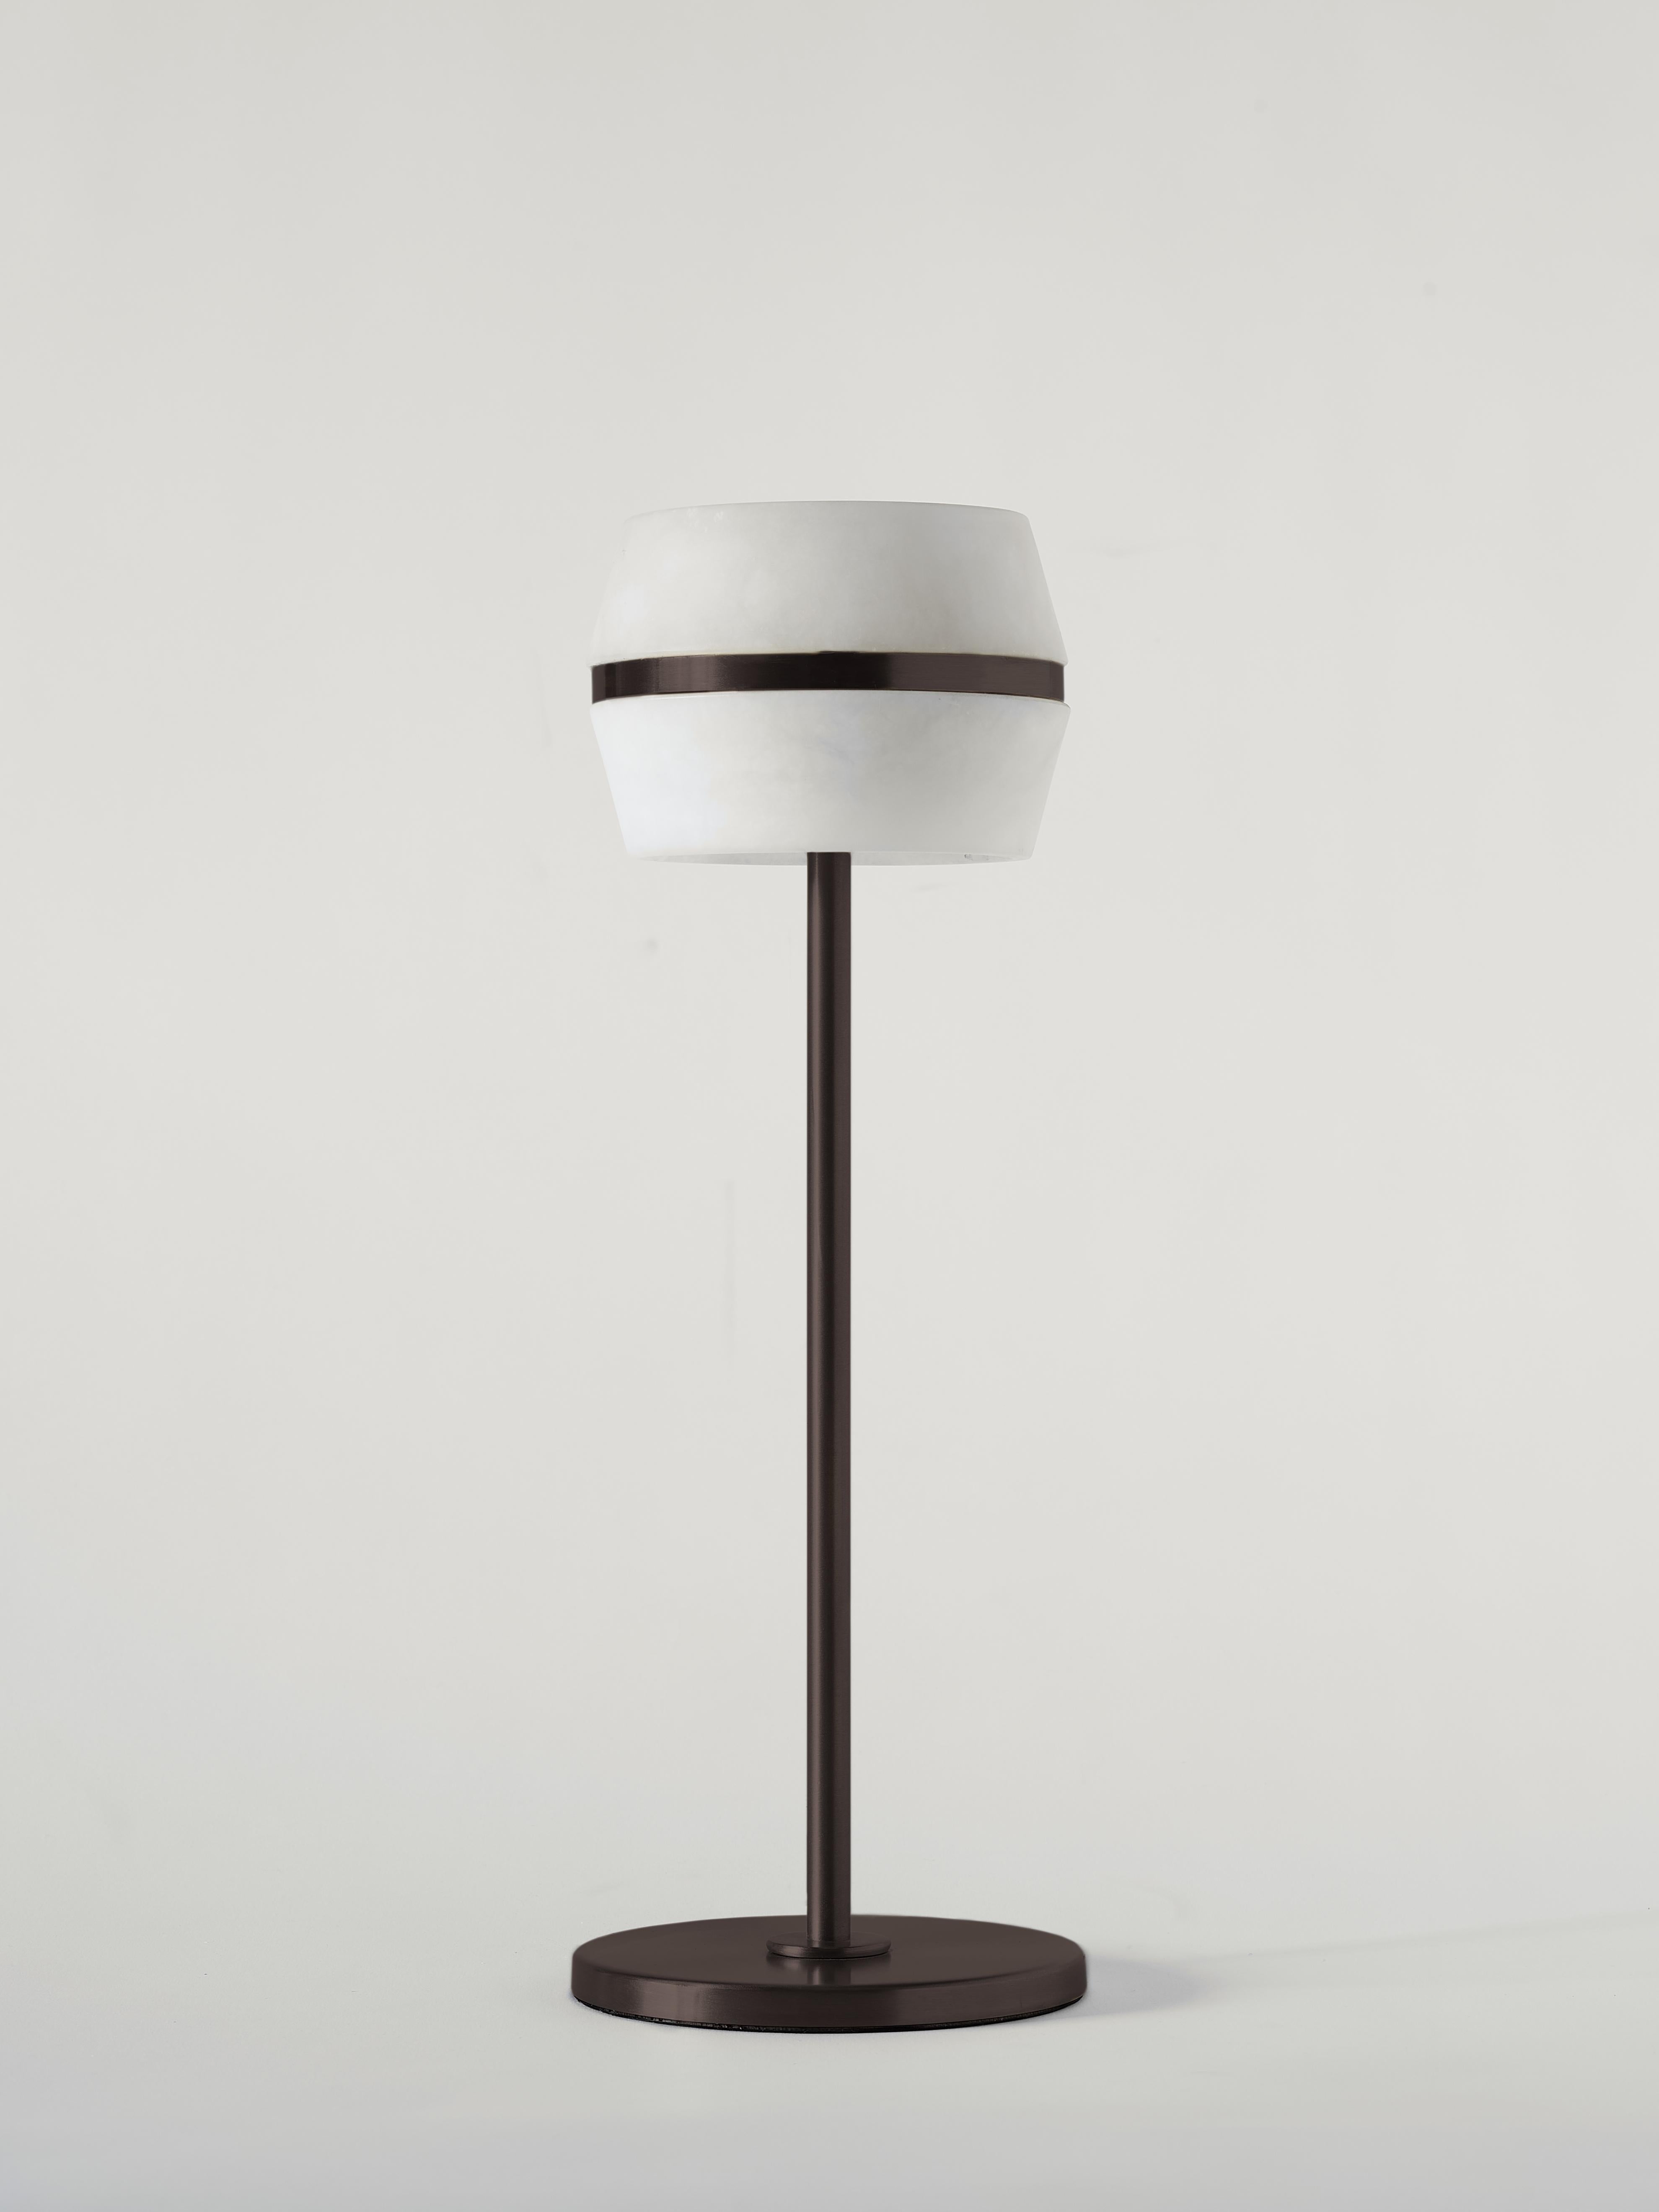 The Tommy wireless table lamp by MATLIGHT Milano is a versatile and functional led light that is designed for use on a table, whether it be in a residential or commercial setting. Its features include a touch sensor and dimmable function, which